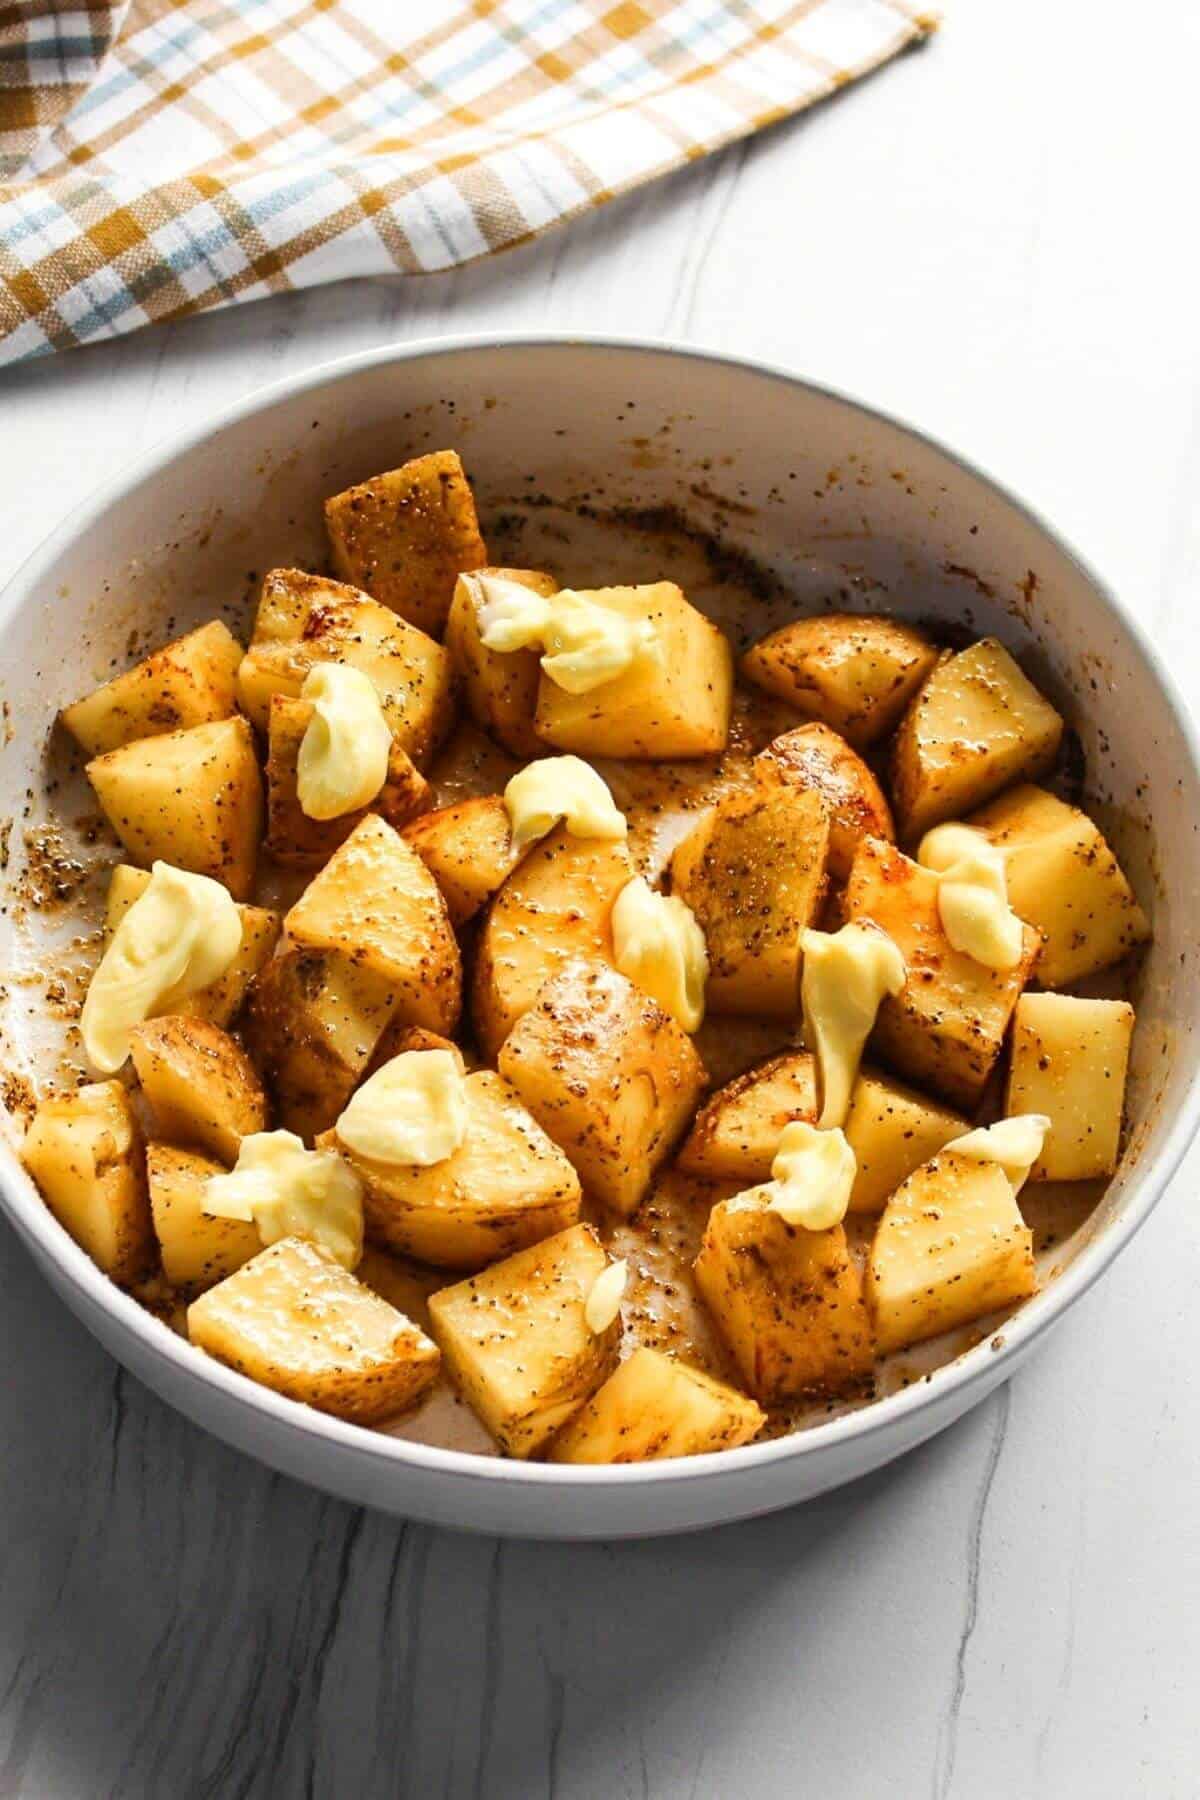 Butter added to seasoned potatoes.